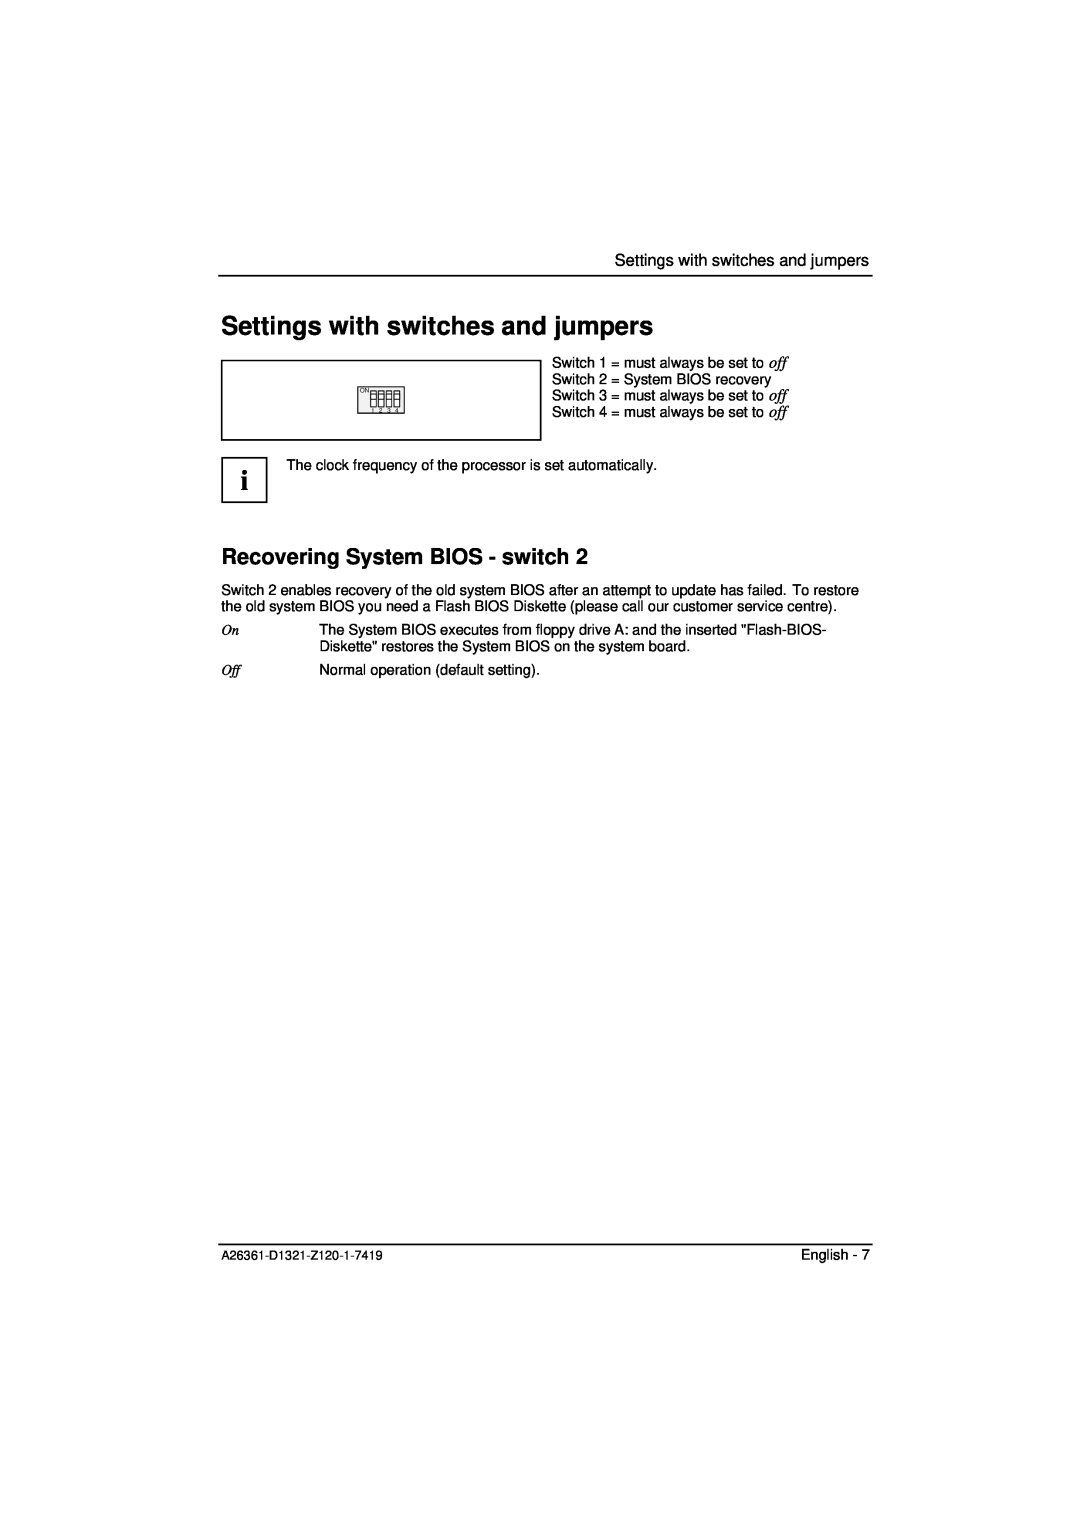 Fujitsu D1321 technical manual Settings with switches and jumpers, Recovering System BIOS - switch 